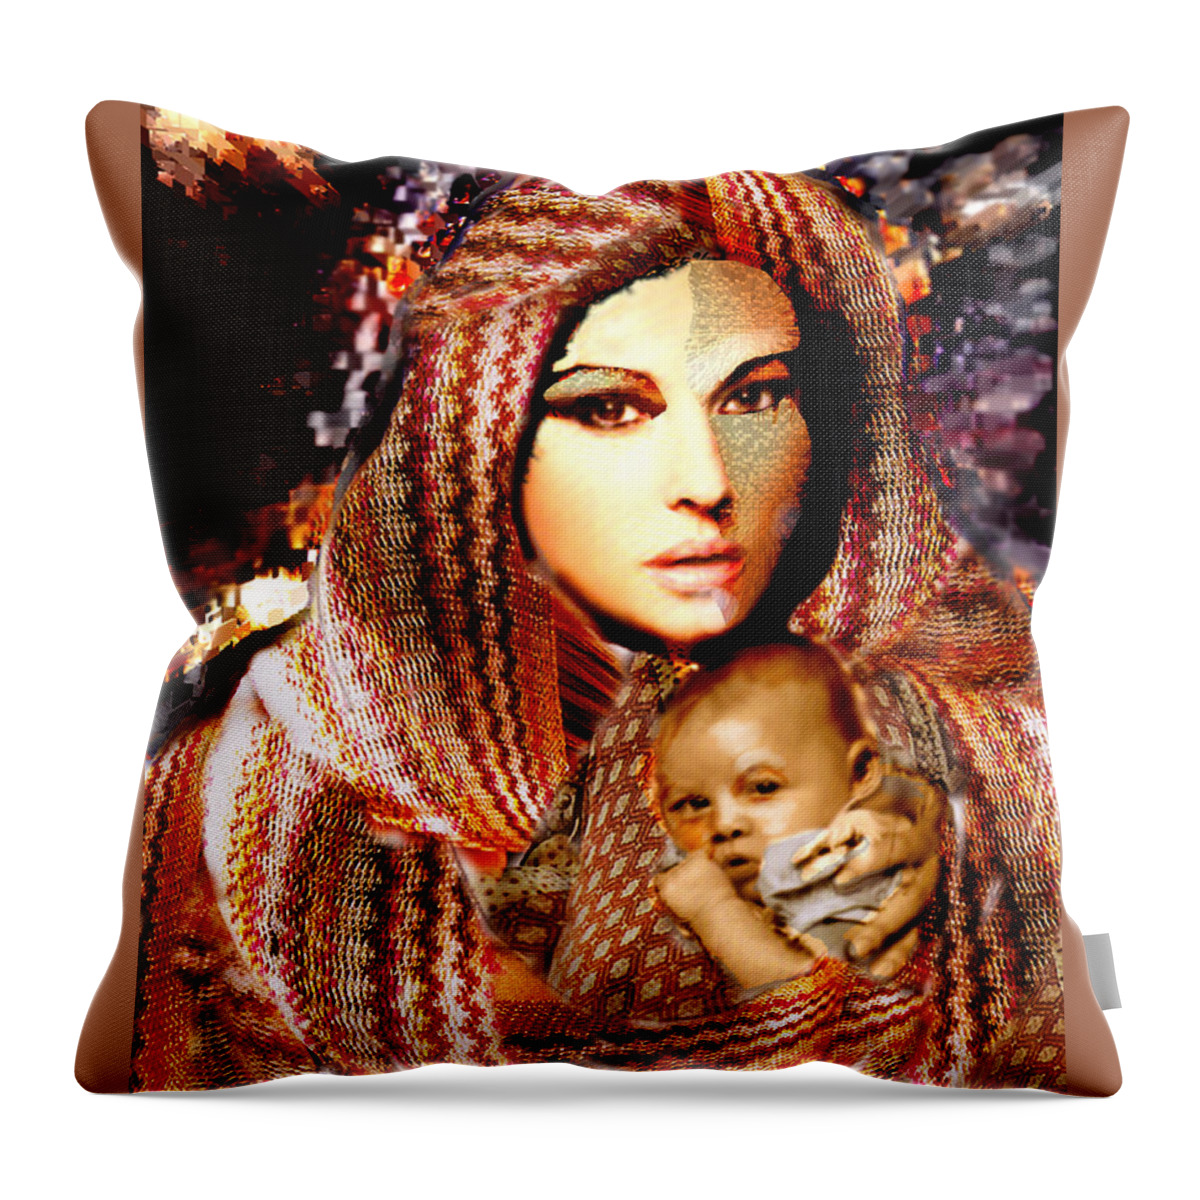 Ladyt Madonna Throw Pillow featuring the digital art Lady Madonna by Seth Weaver